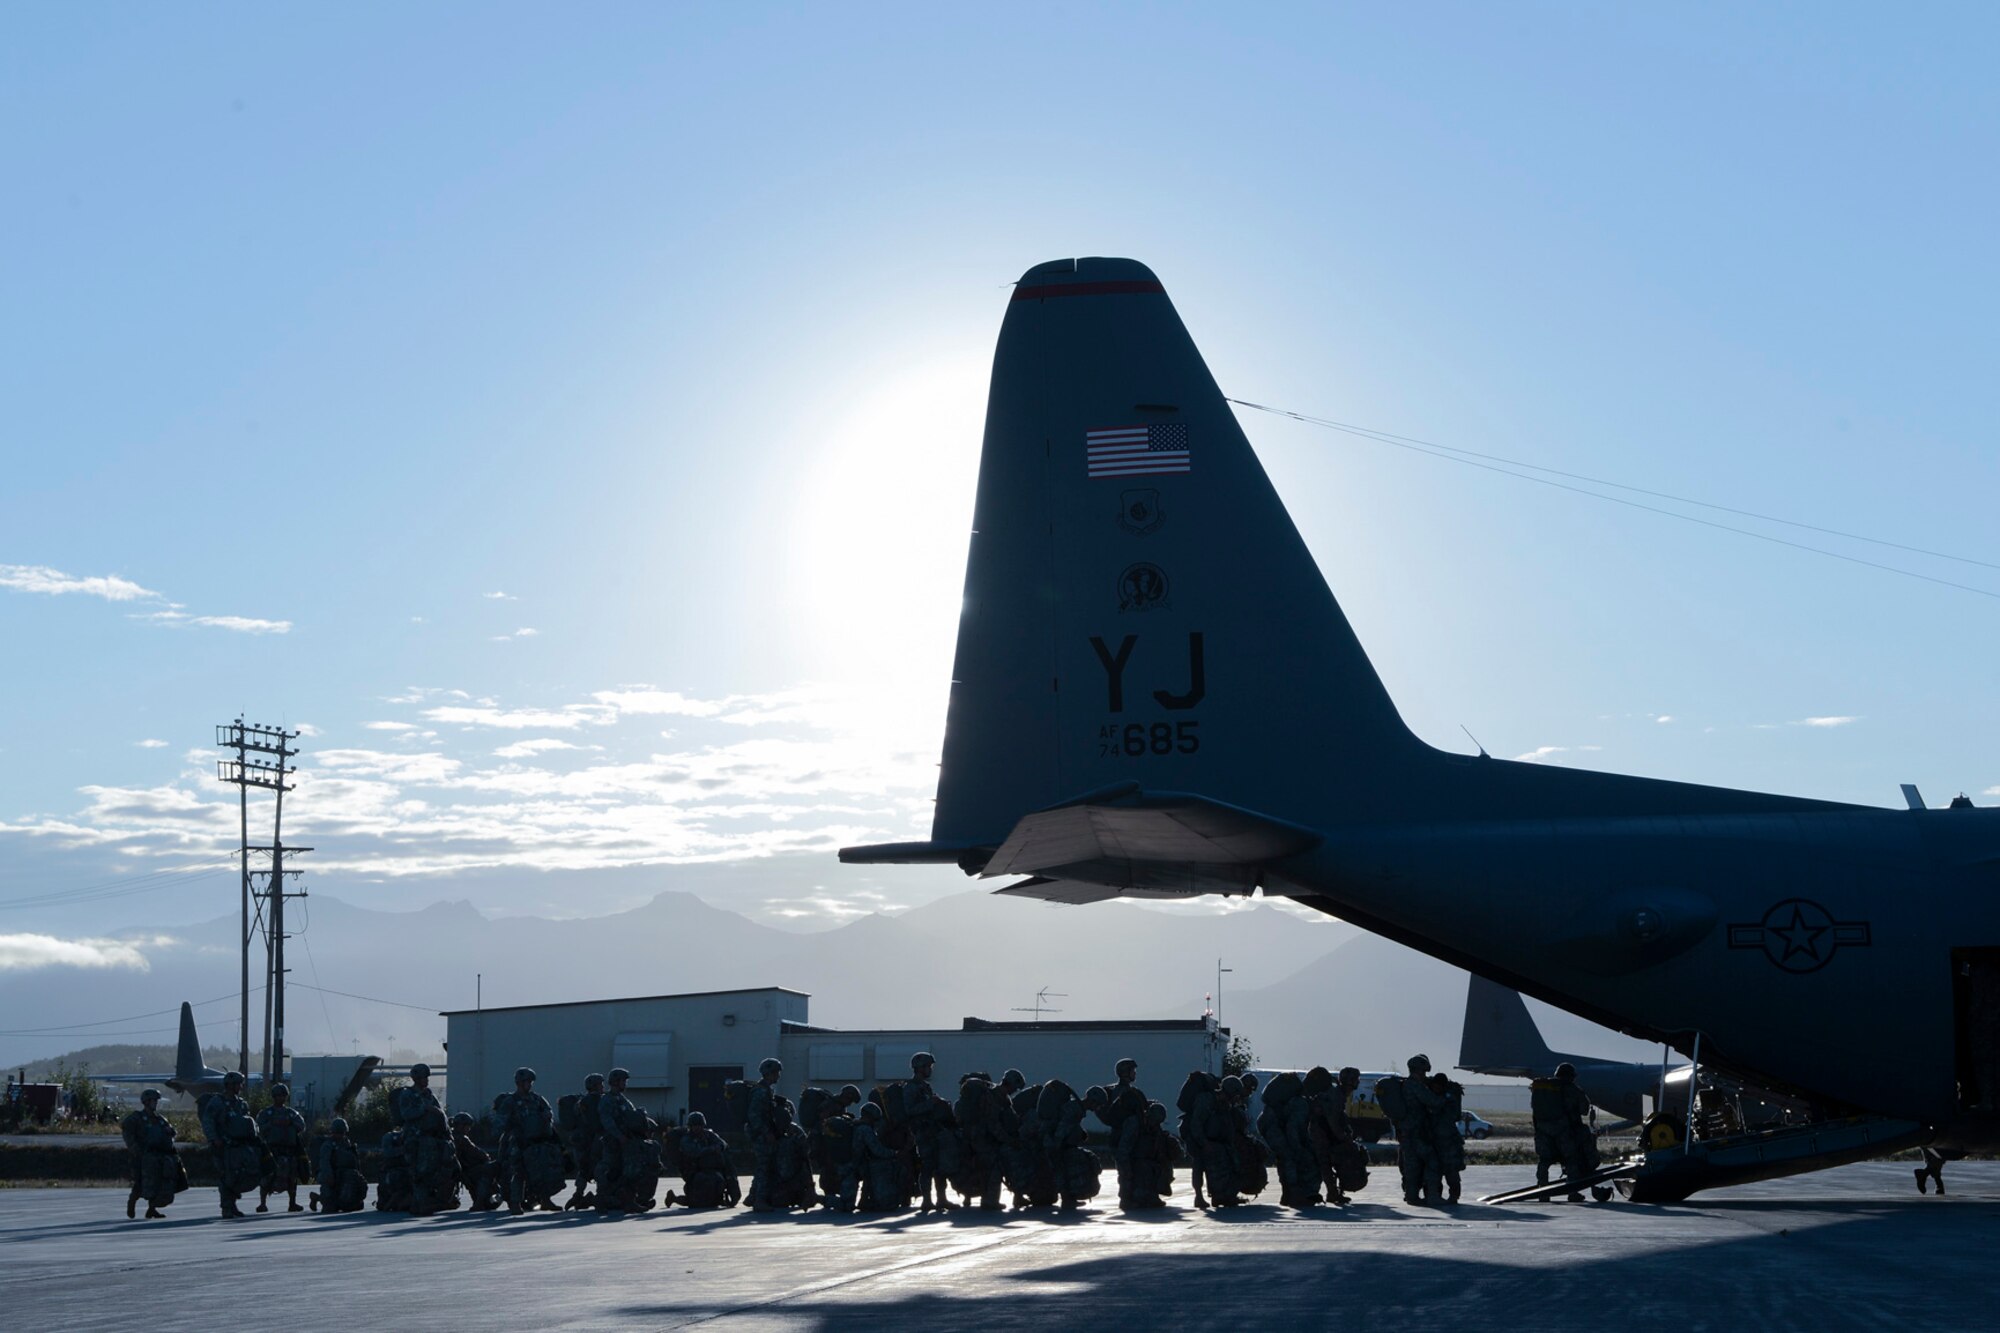 U.S. Army Soldiers with the 1st Battalion (Airborne), 501st Infantry Regiment, and Japan Ground Self-Defense Force members board a C-130 Hercules from Yokota Air Base, Japan, during Red Flag -Alaska at Joint Base Elmendorf-Richardson, Alaska, Aug. 12, 2015. Red Flag -Alaska is an exercise that provides joint offensive counter-air, interdiction, close air support and large force employment training in a simulated combat environment. More than 20 allied countries have participated in Red Flag-Alaska since its conception, improving integration, interoperability and cross-cultural competence. (U.S. Air Force photo by Staff Sgt. Cody H. Ramirez/Released)